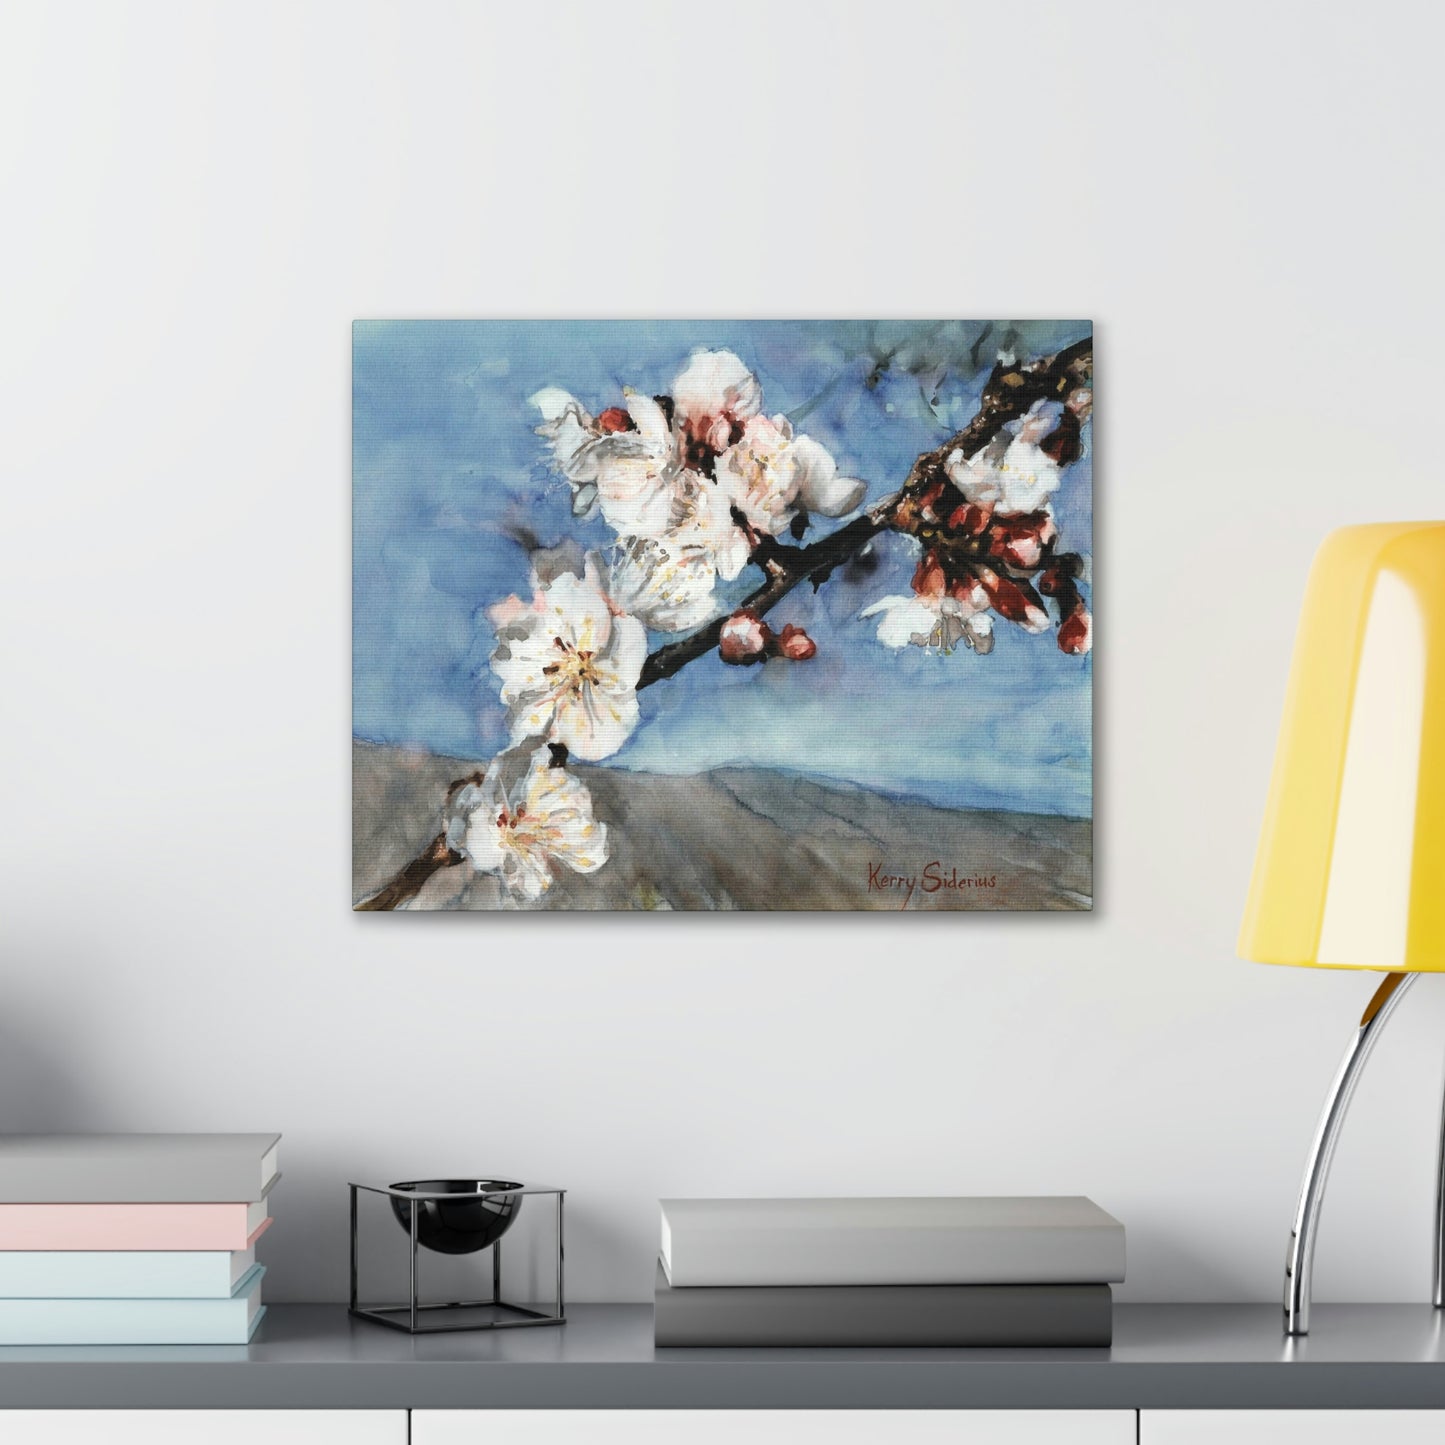 "Nectarine Blossoms" Stretched Canvas - Kerry Siderius Art 